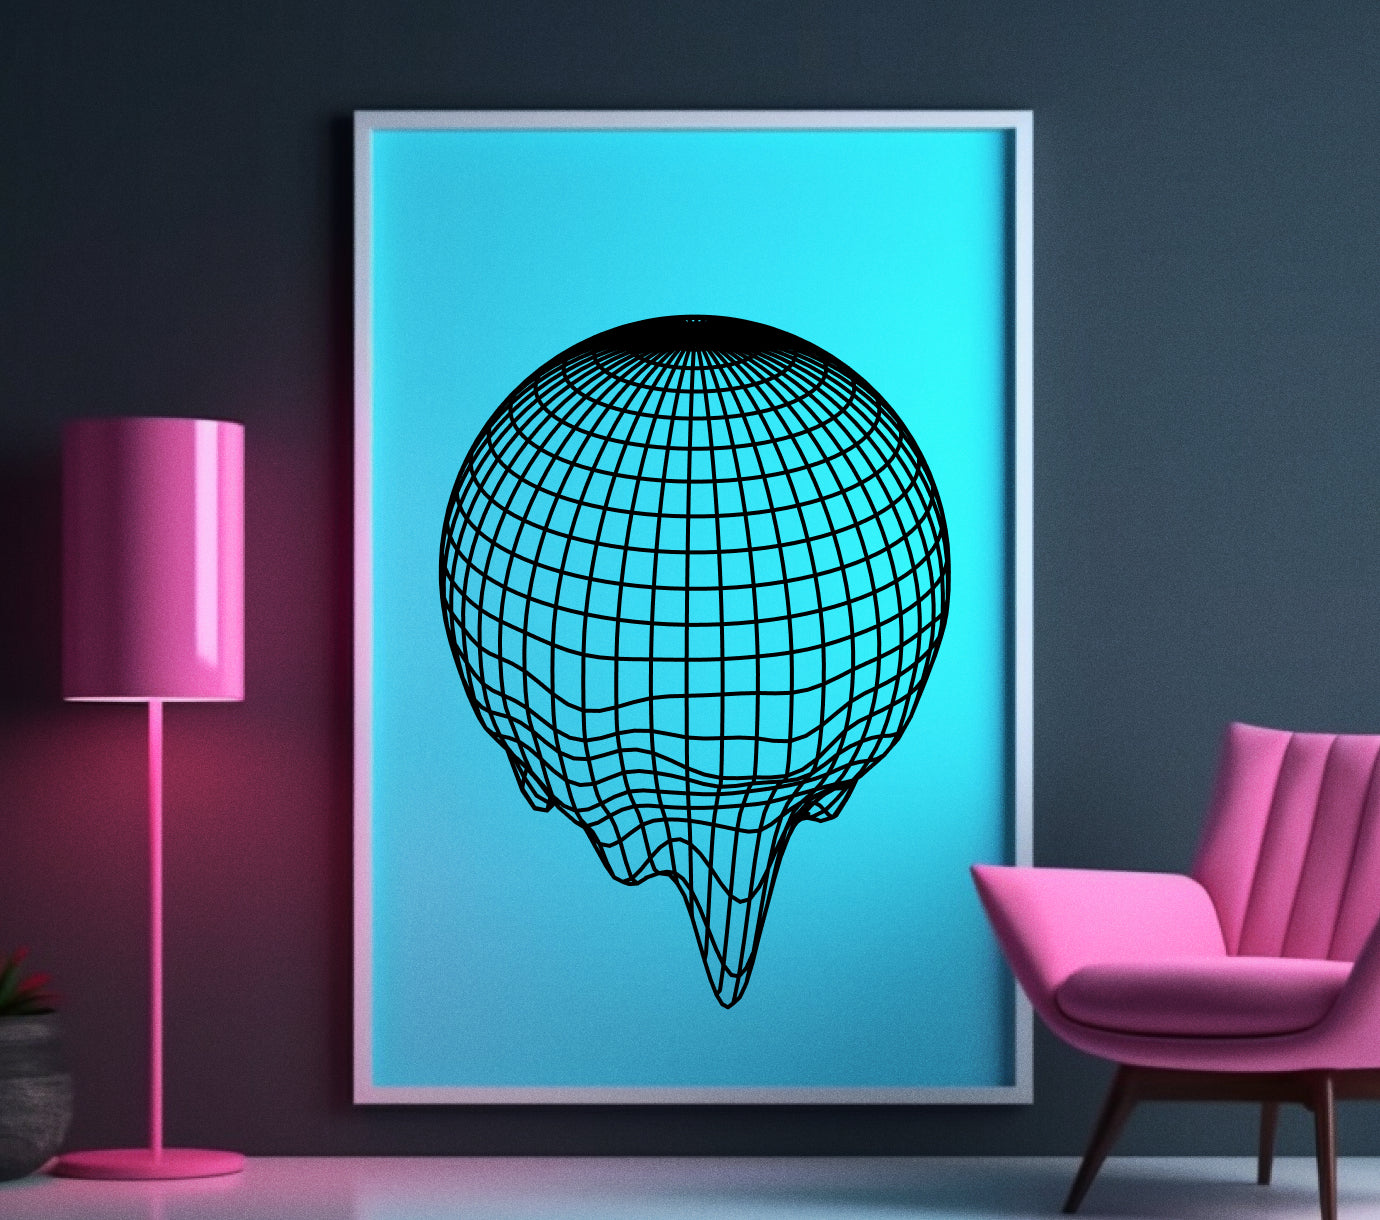 custom poster of a global design that appears to be melting